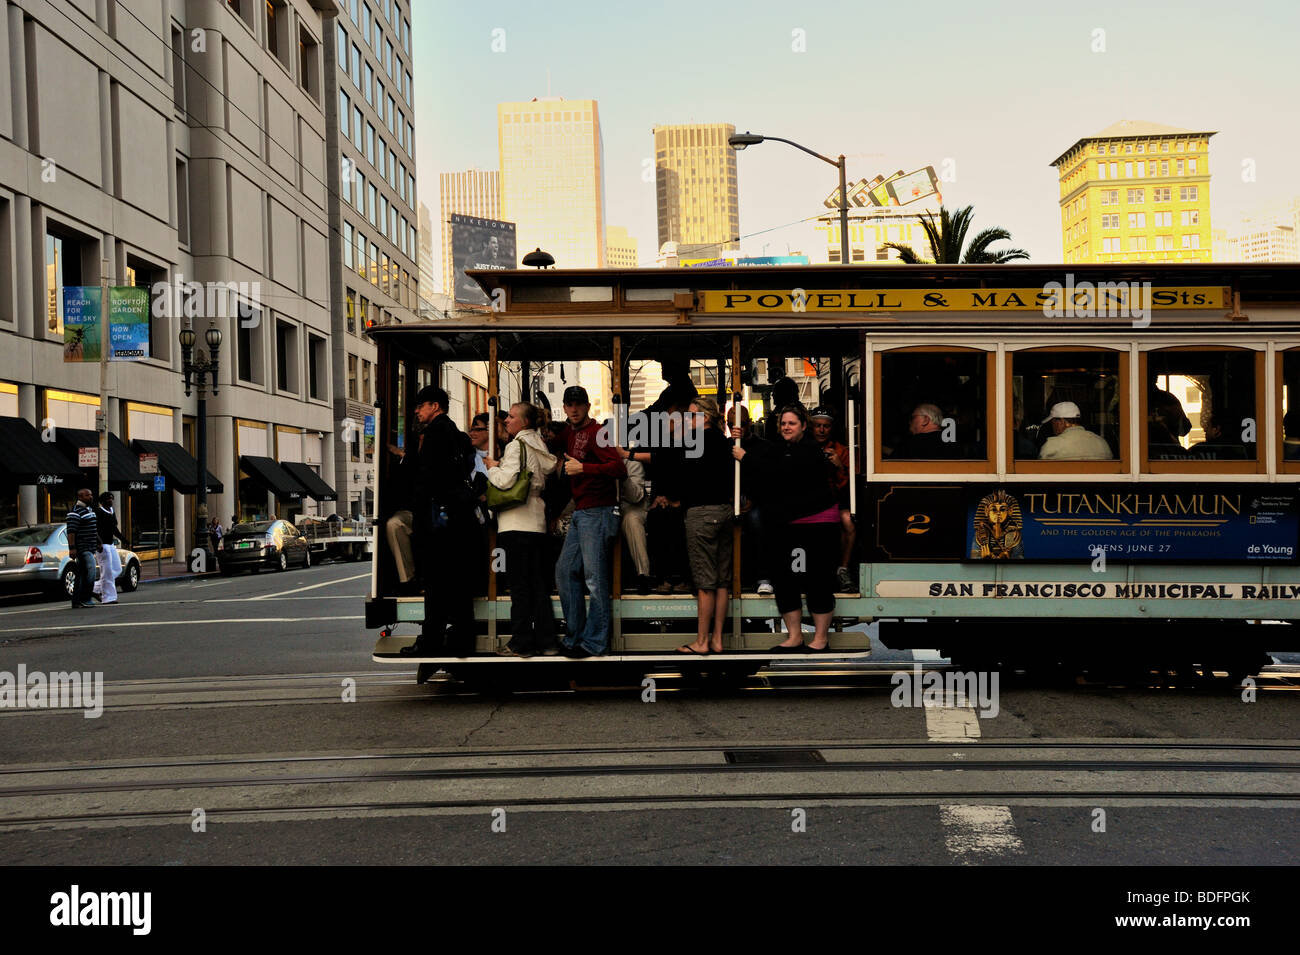 Tramcars or Cable cars in San Francisco Stock Photo